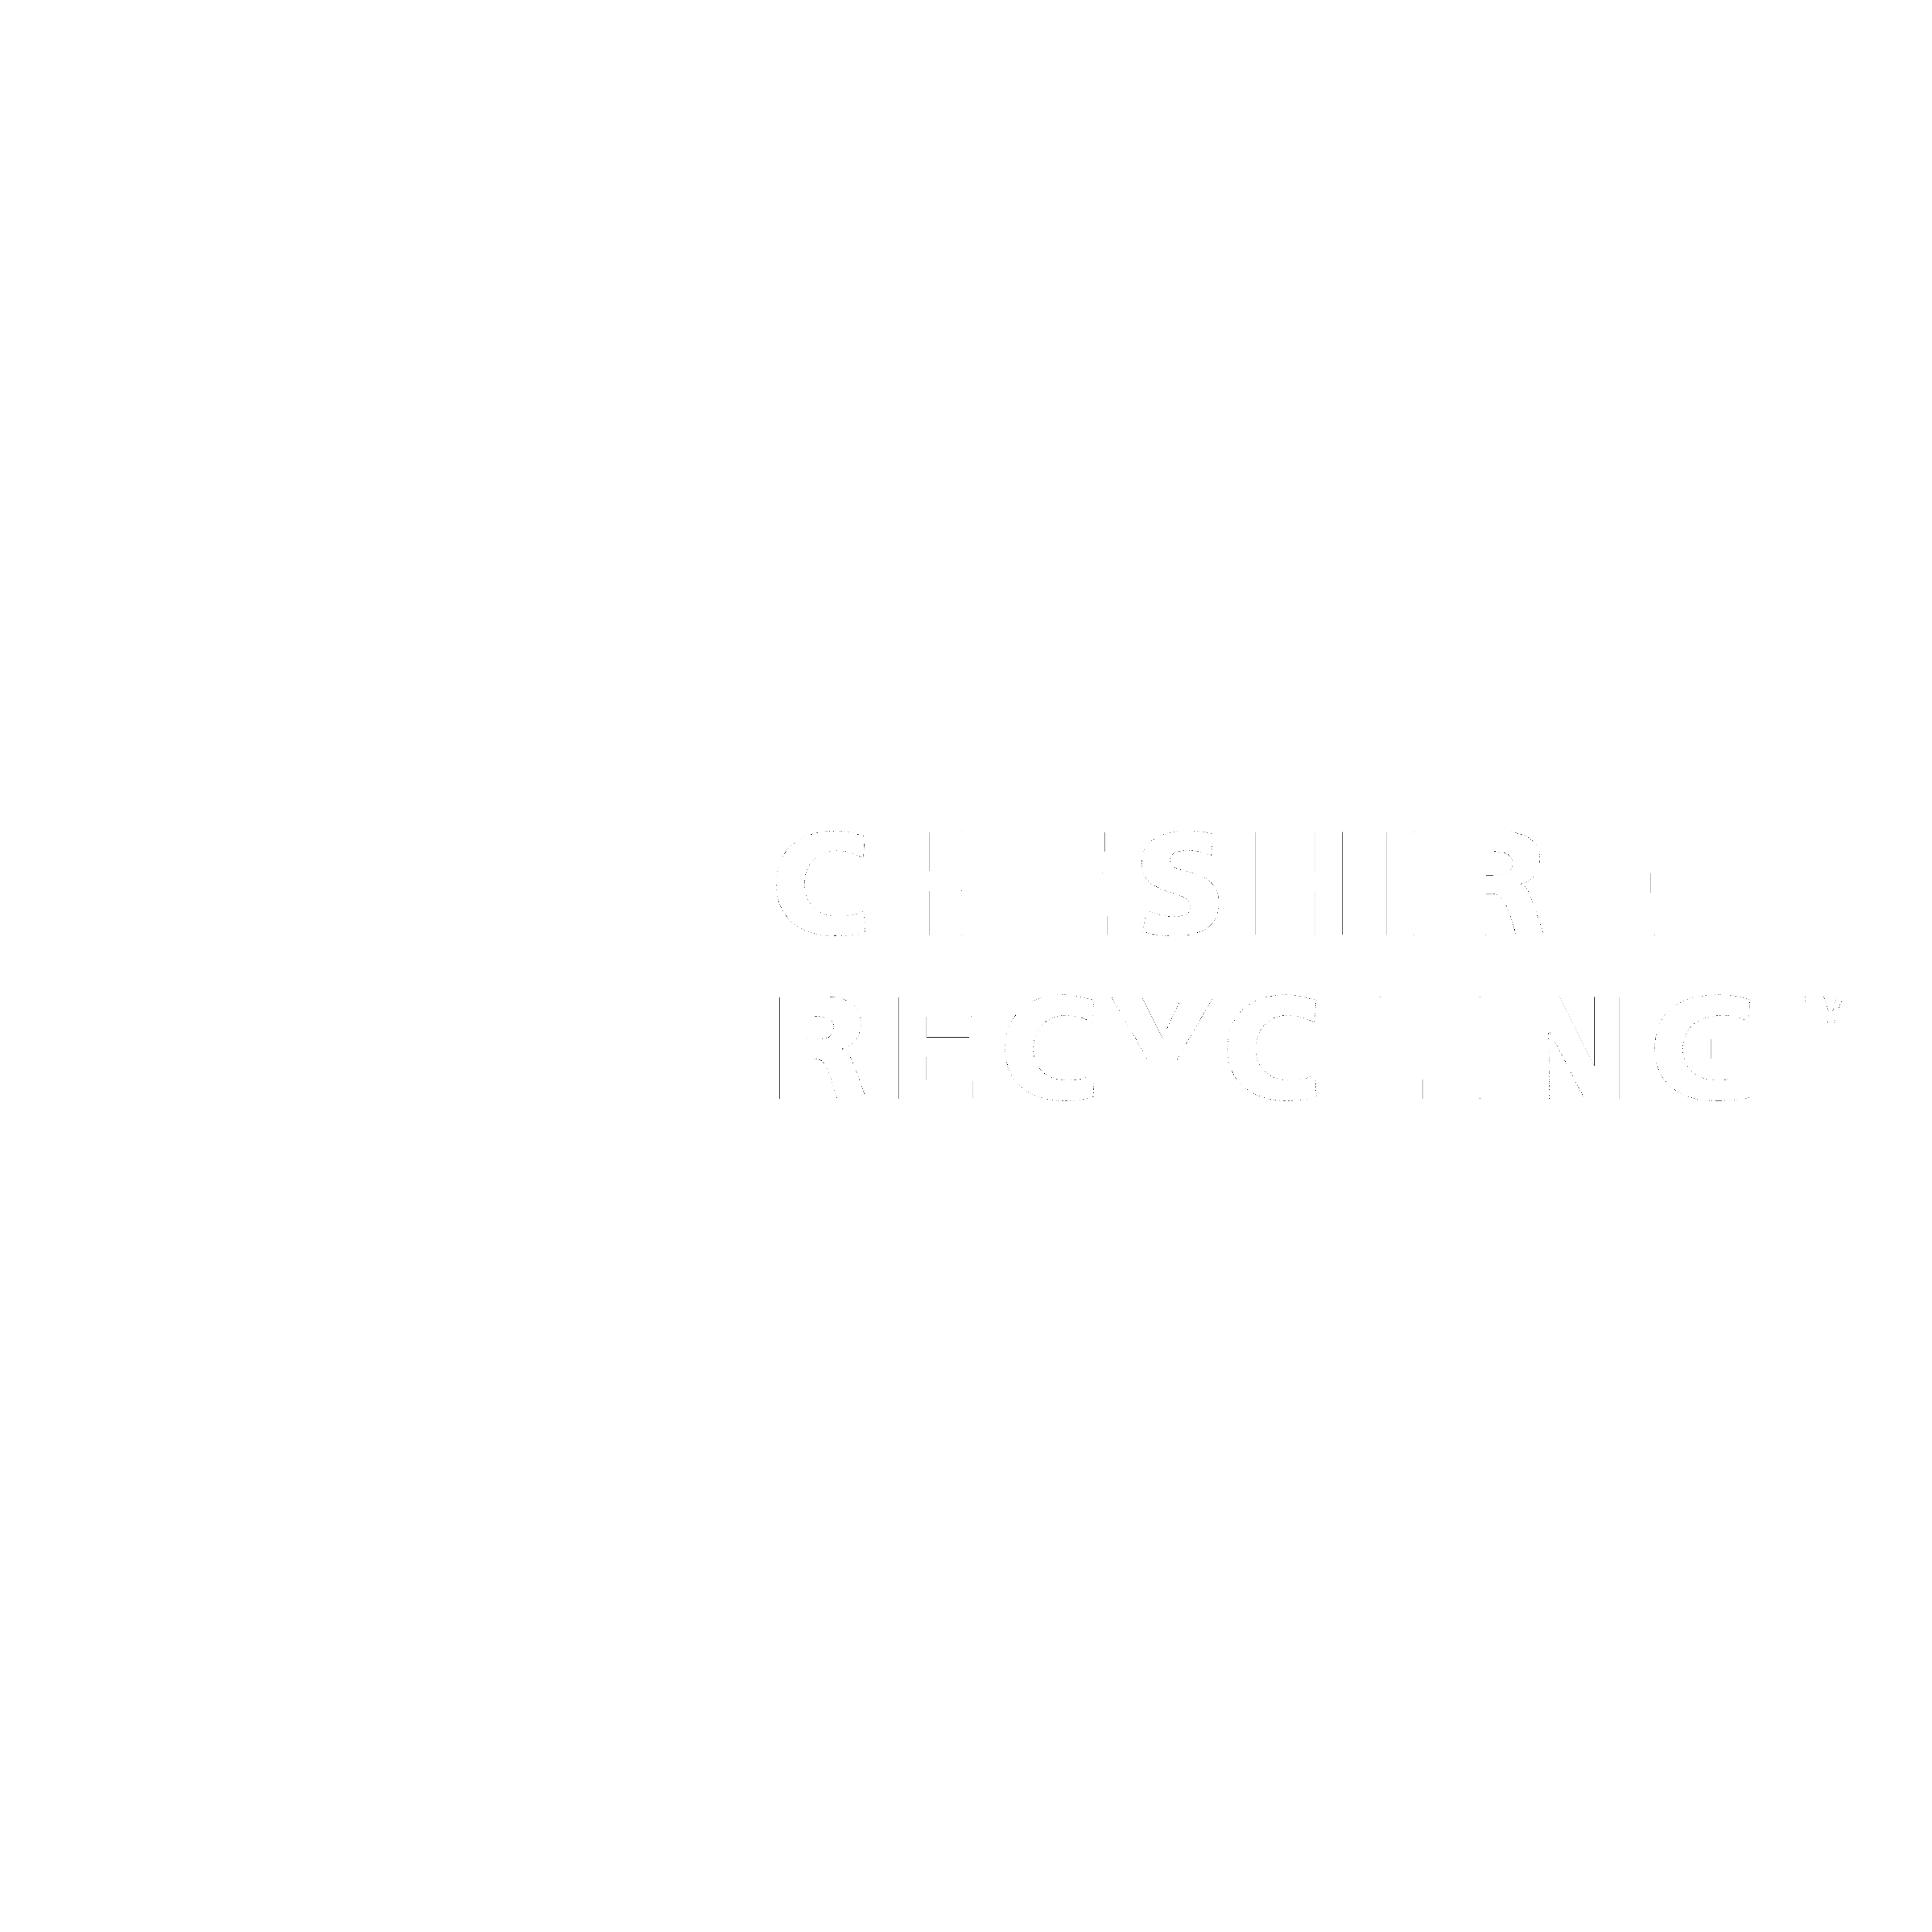 Black and White Recycle Logo - Cheshire Recycling Logo PNG Transparent & SVG Vector